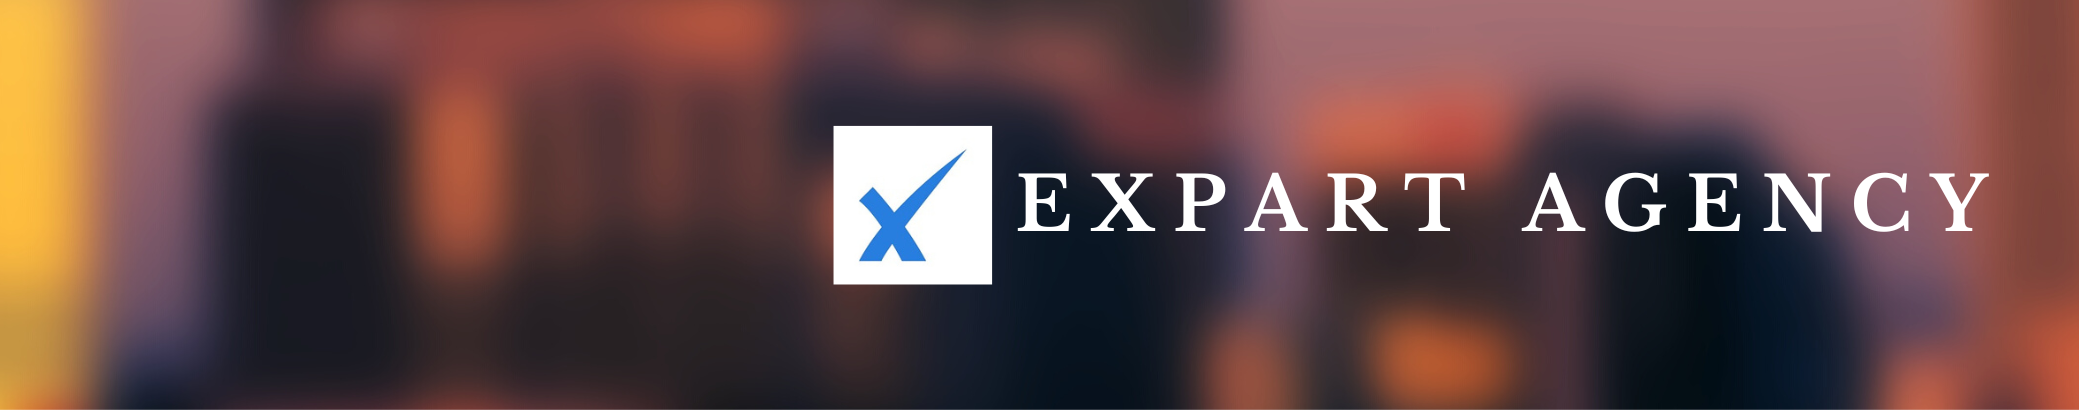 Expart Agency's profile banner